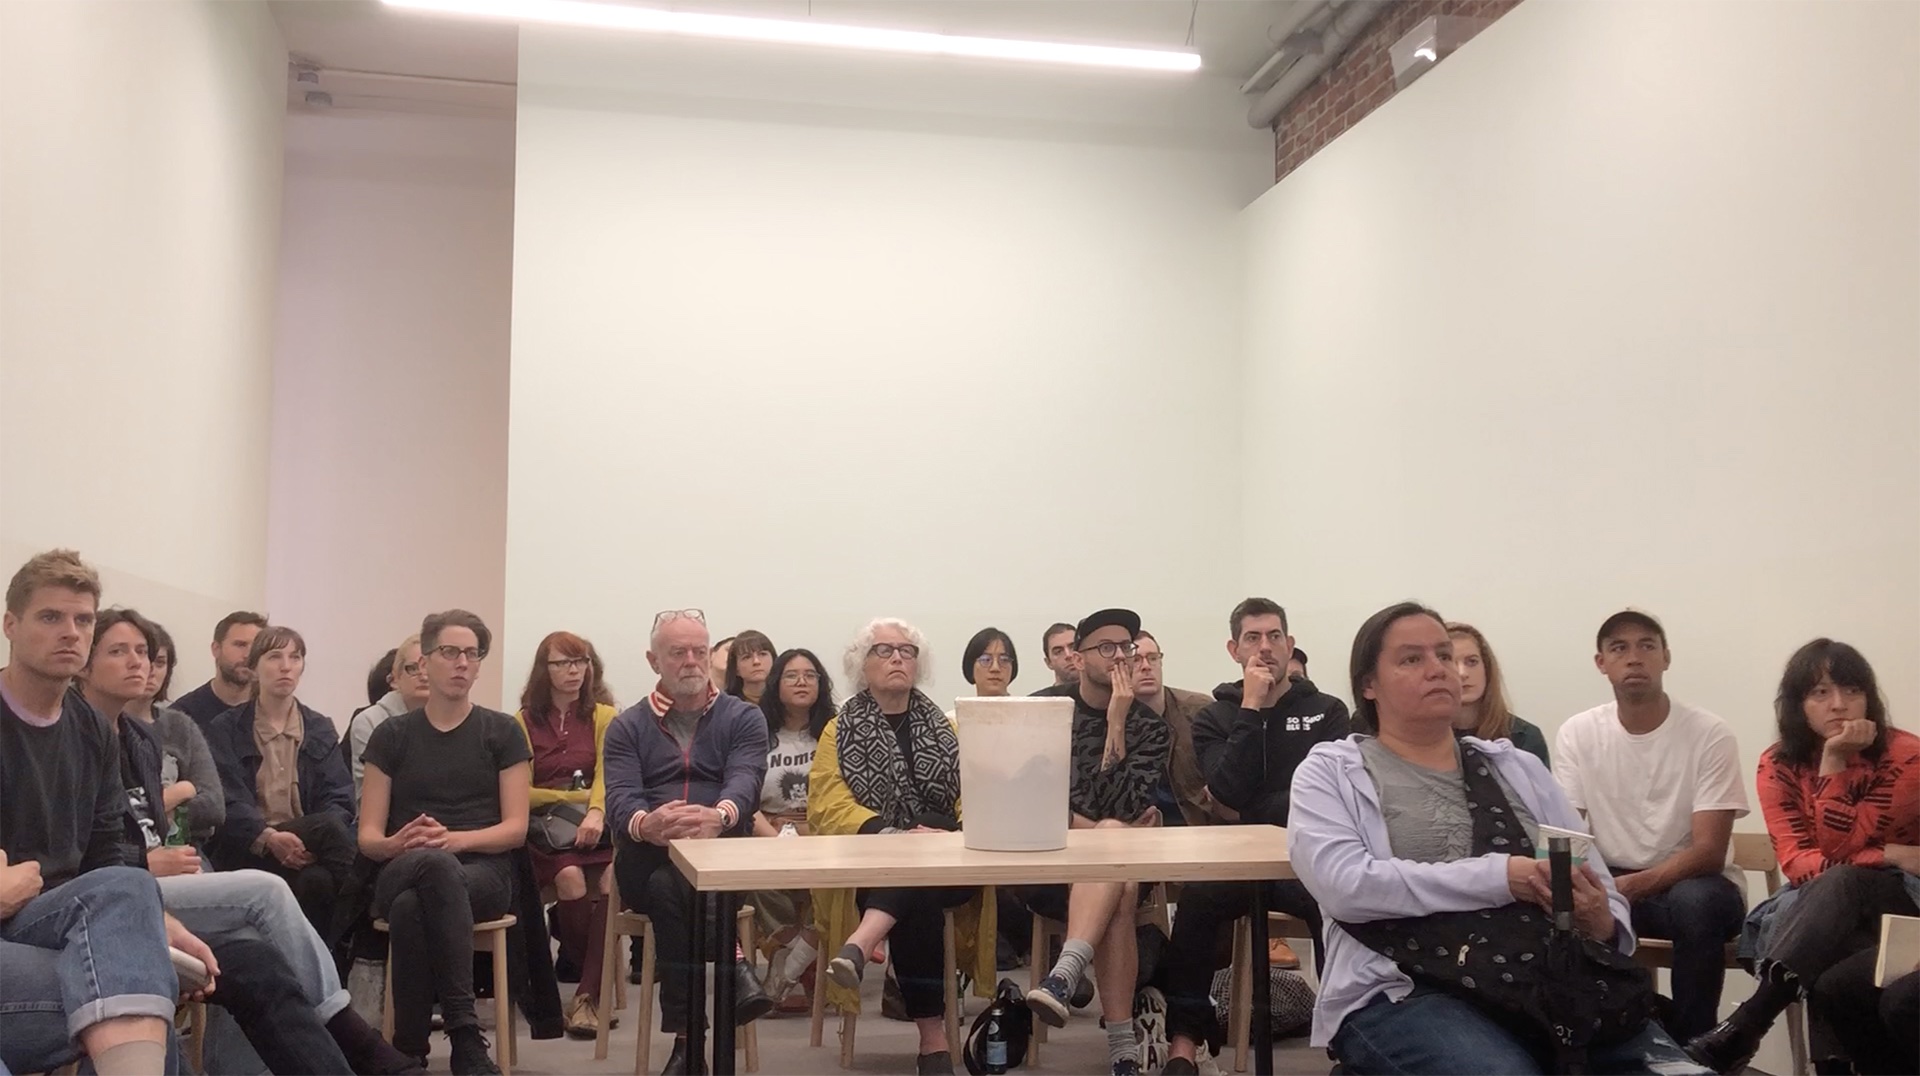 A white gallery room full of people sitting and staring past the camera; a wooden table stands in the middle of the audience